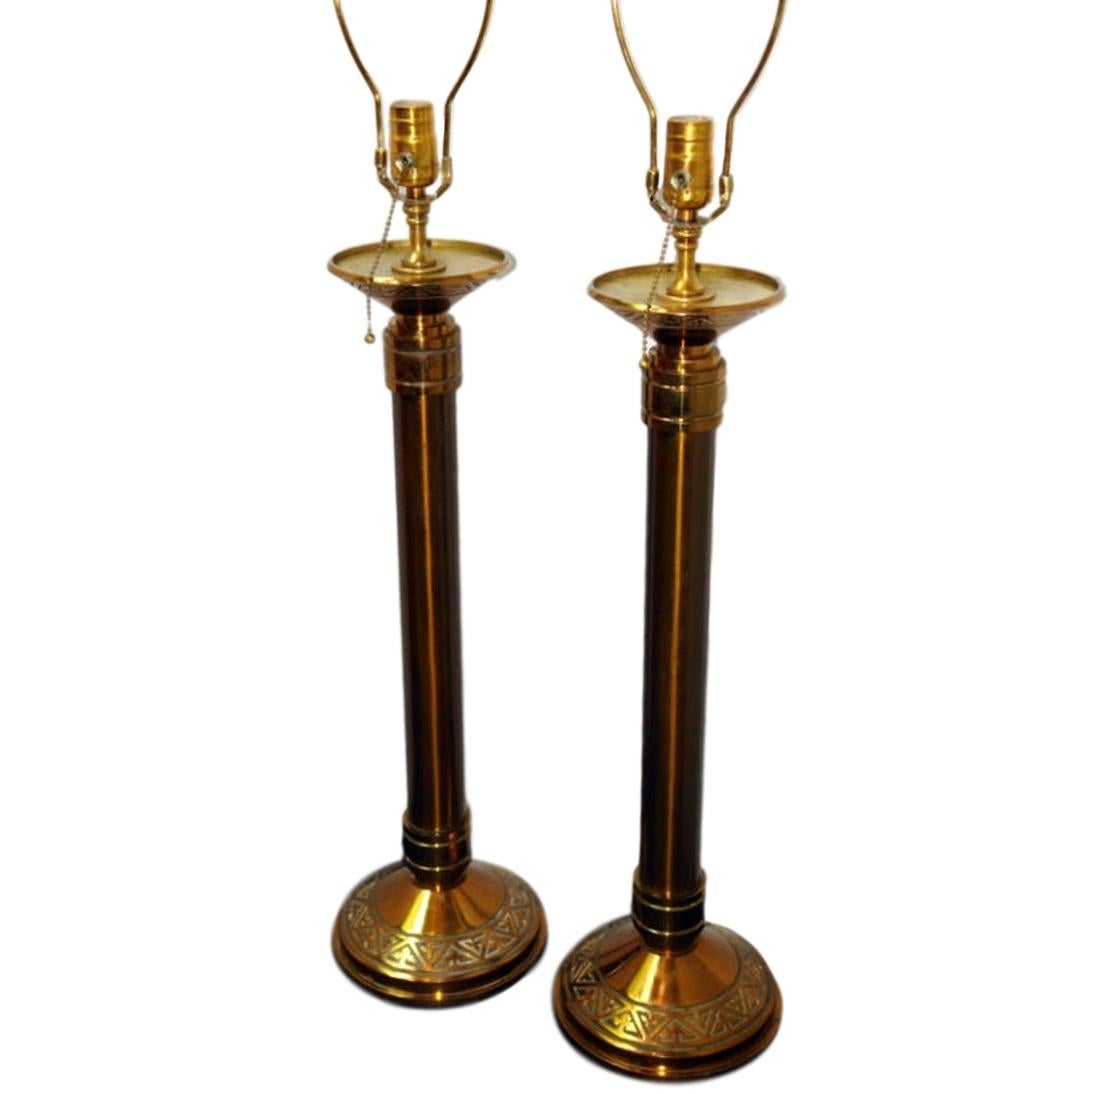 Set of four circa 1900 French candlesticks mounted as lamps with original gilt finish. Sold in pairs.

